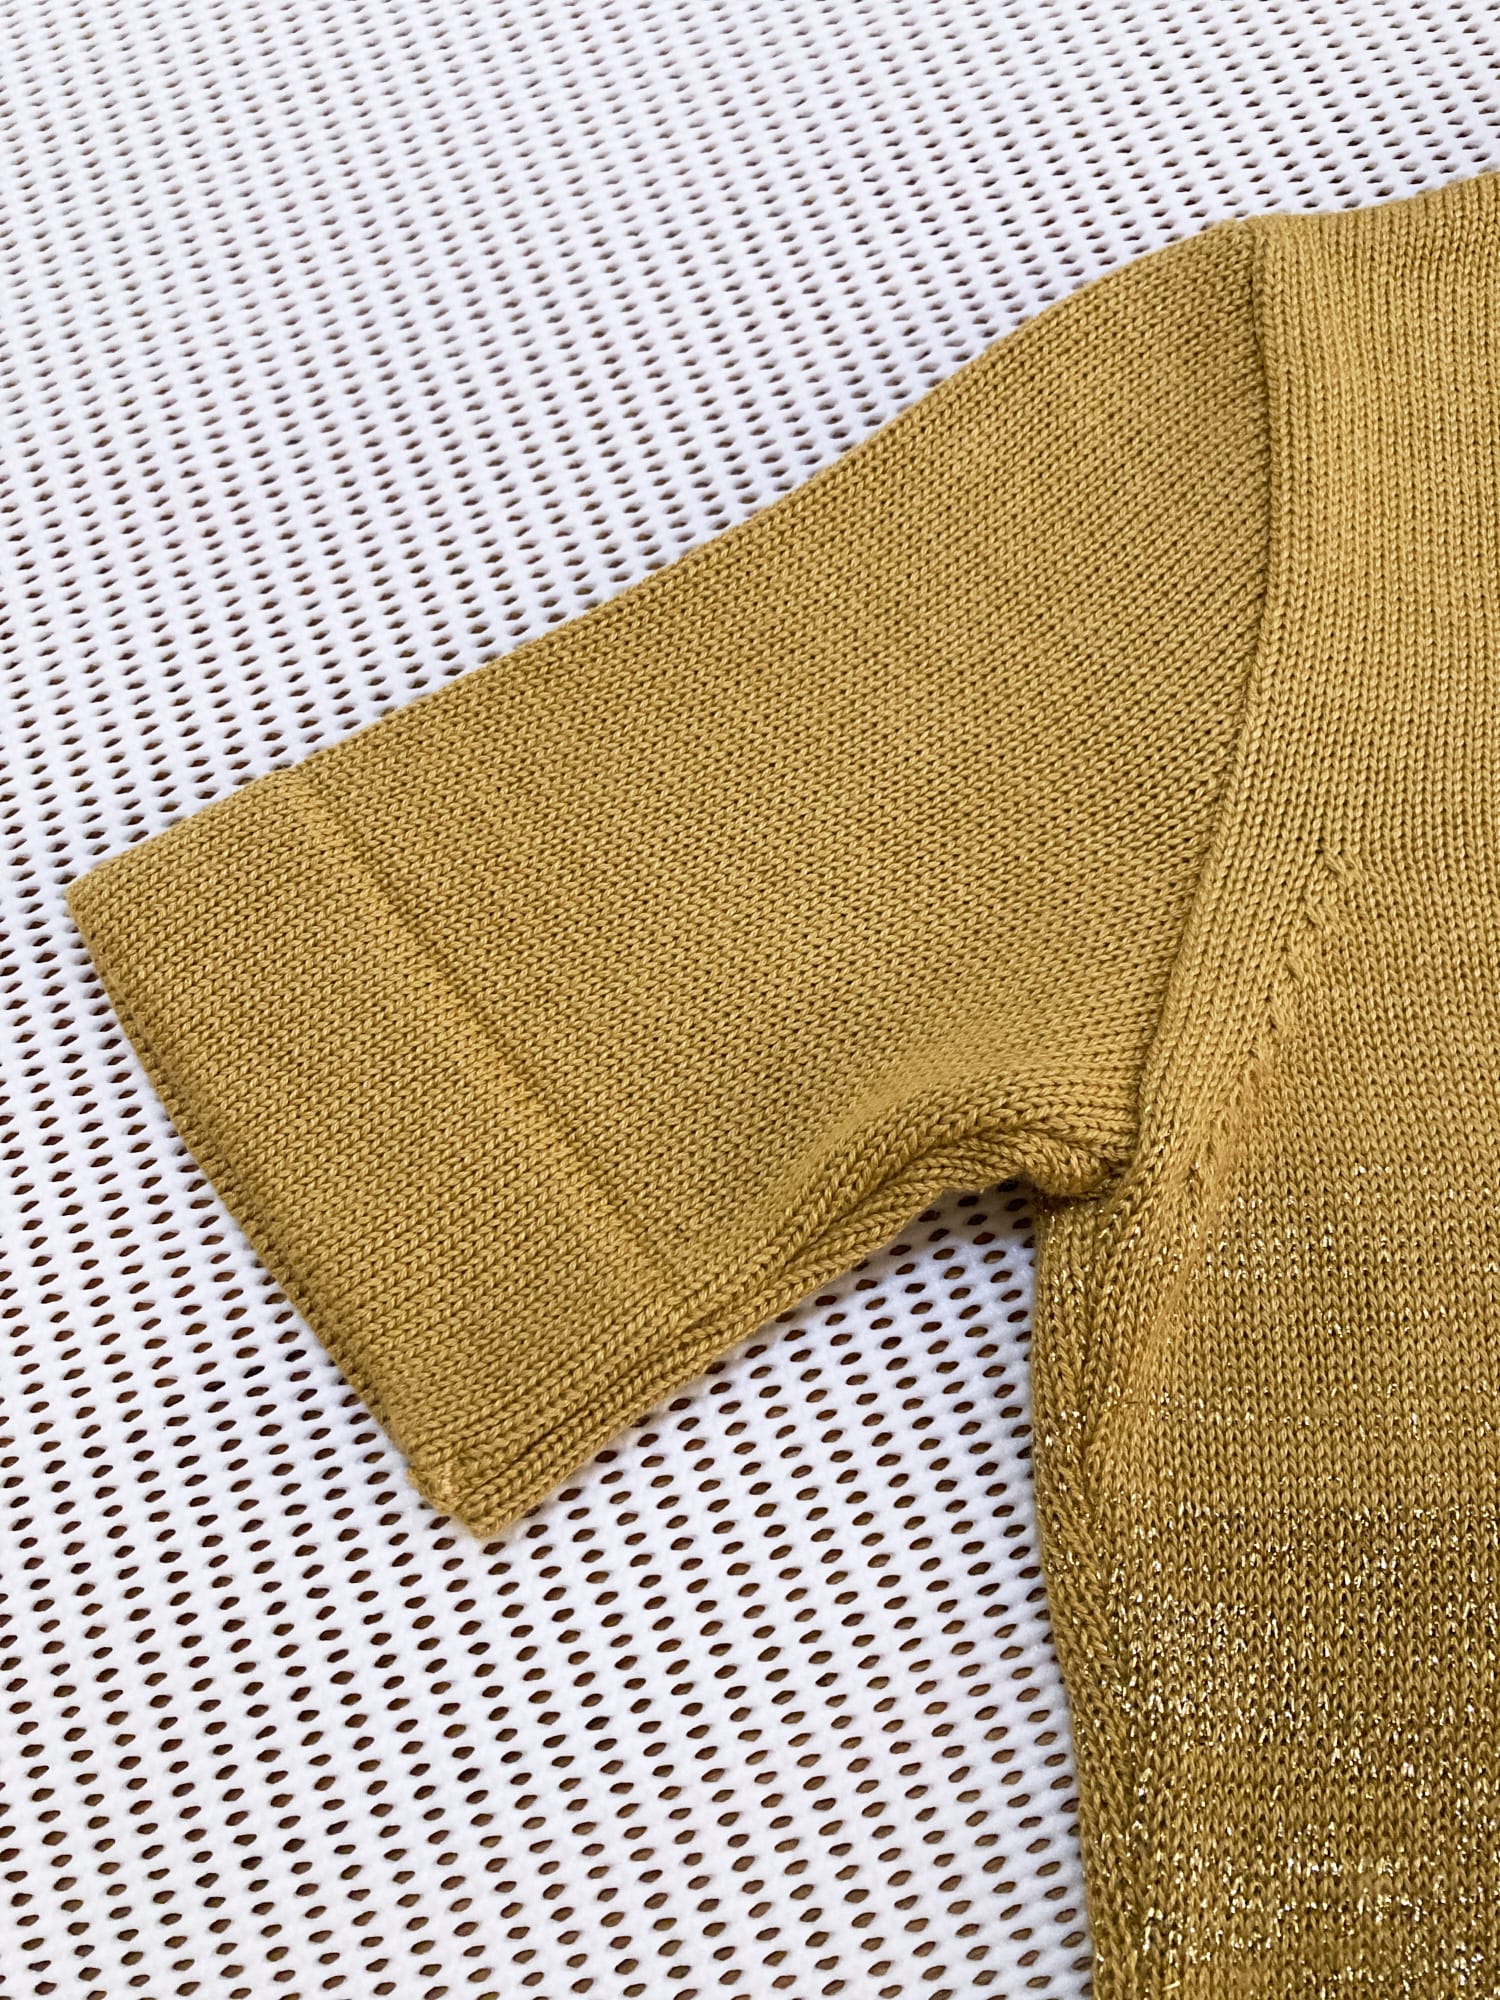 Dirk Bikkembergs 1990s gold knitted polo shirt with lurex threads - S